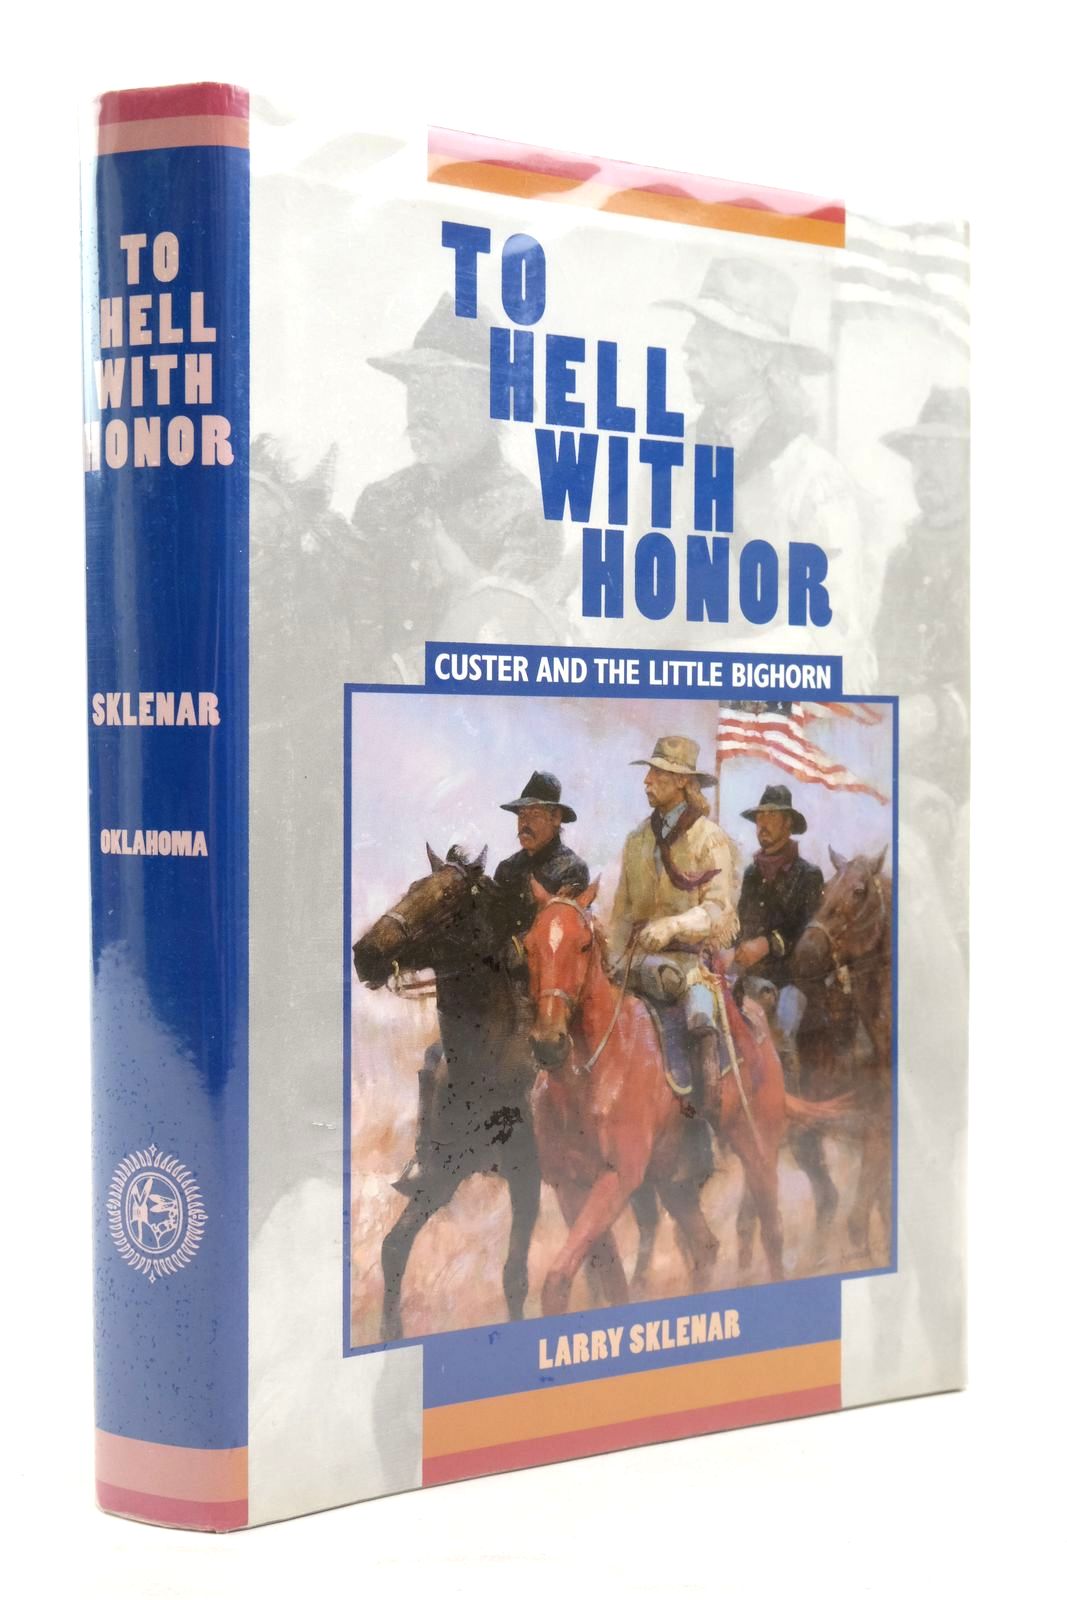 Photo of TO HELL WITH HONOR: CUSTER AND THE LITTLE BIGHORN written by Sklenar, Larry published by University of Oklahoma Press (STOCK CODE: 2137853)  for sale by Stella & Rose's Books